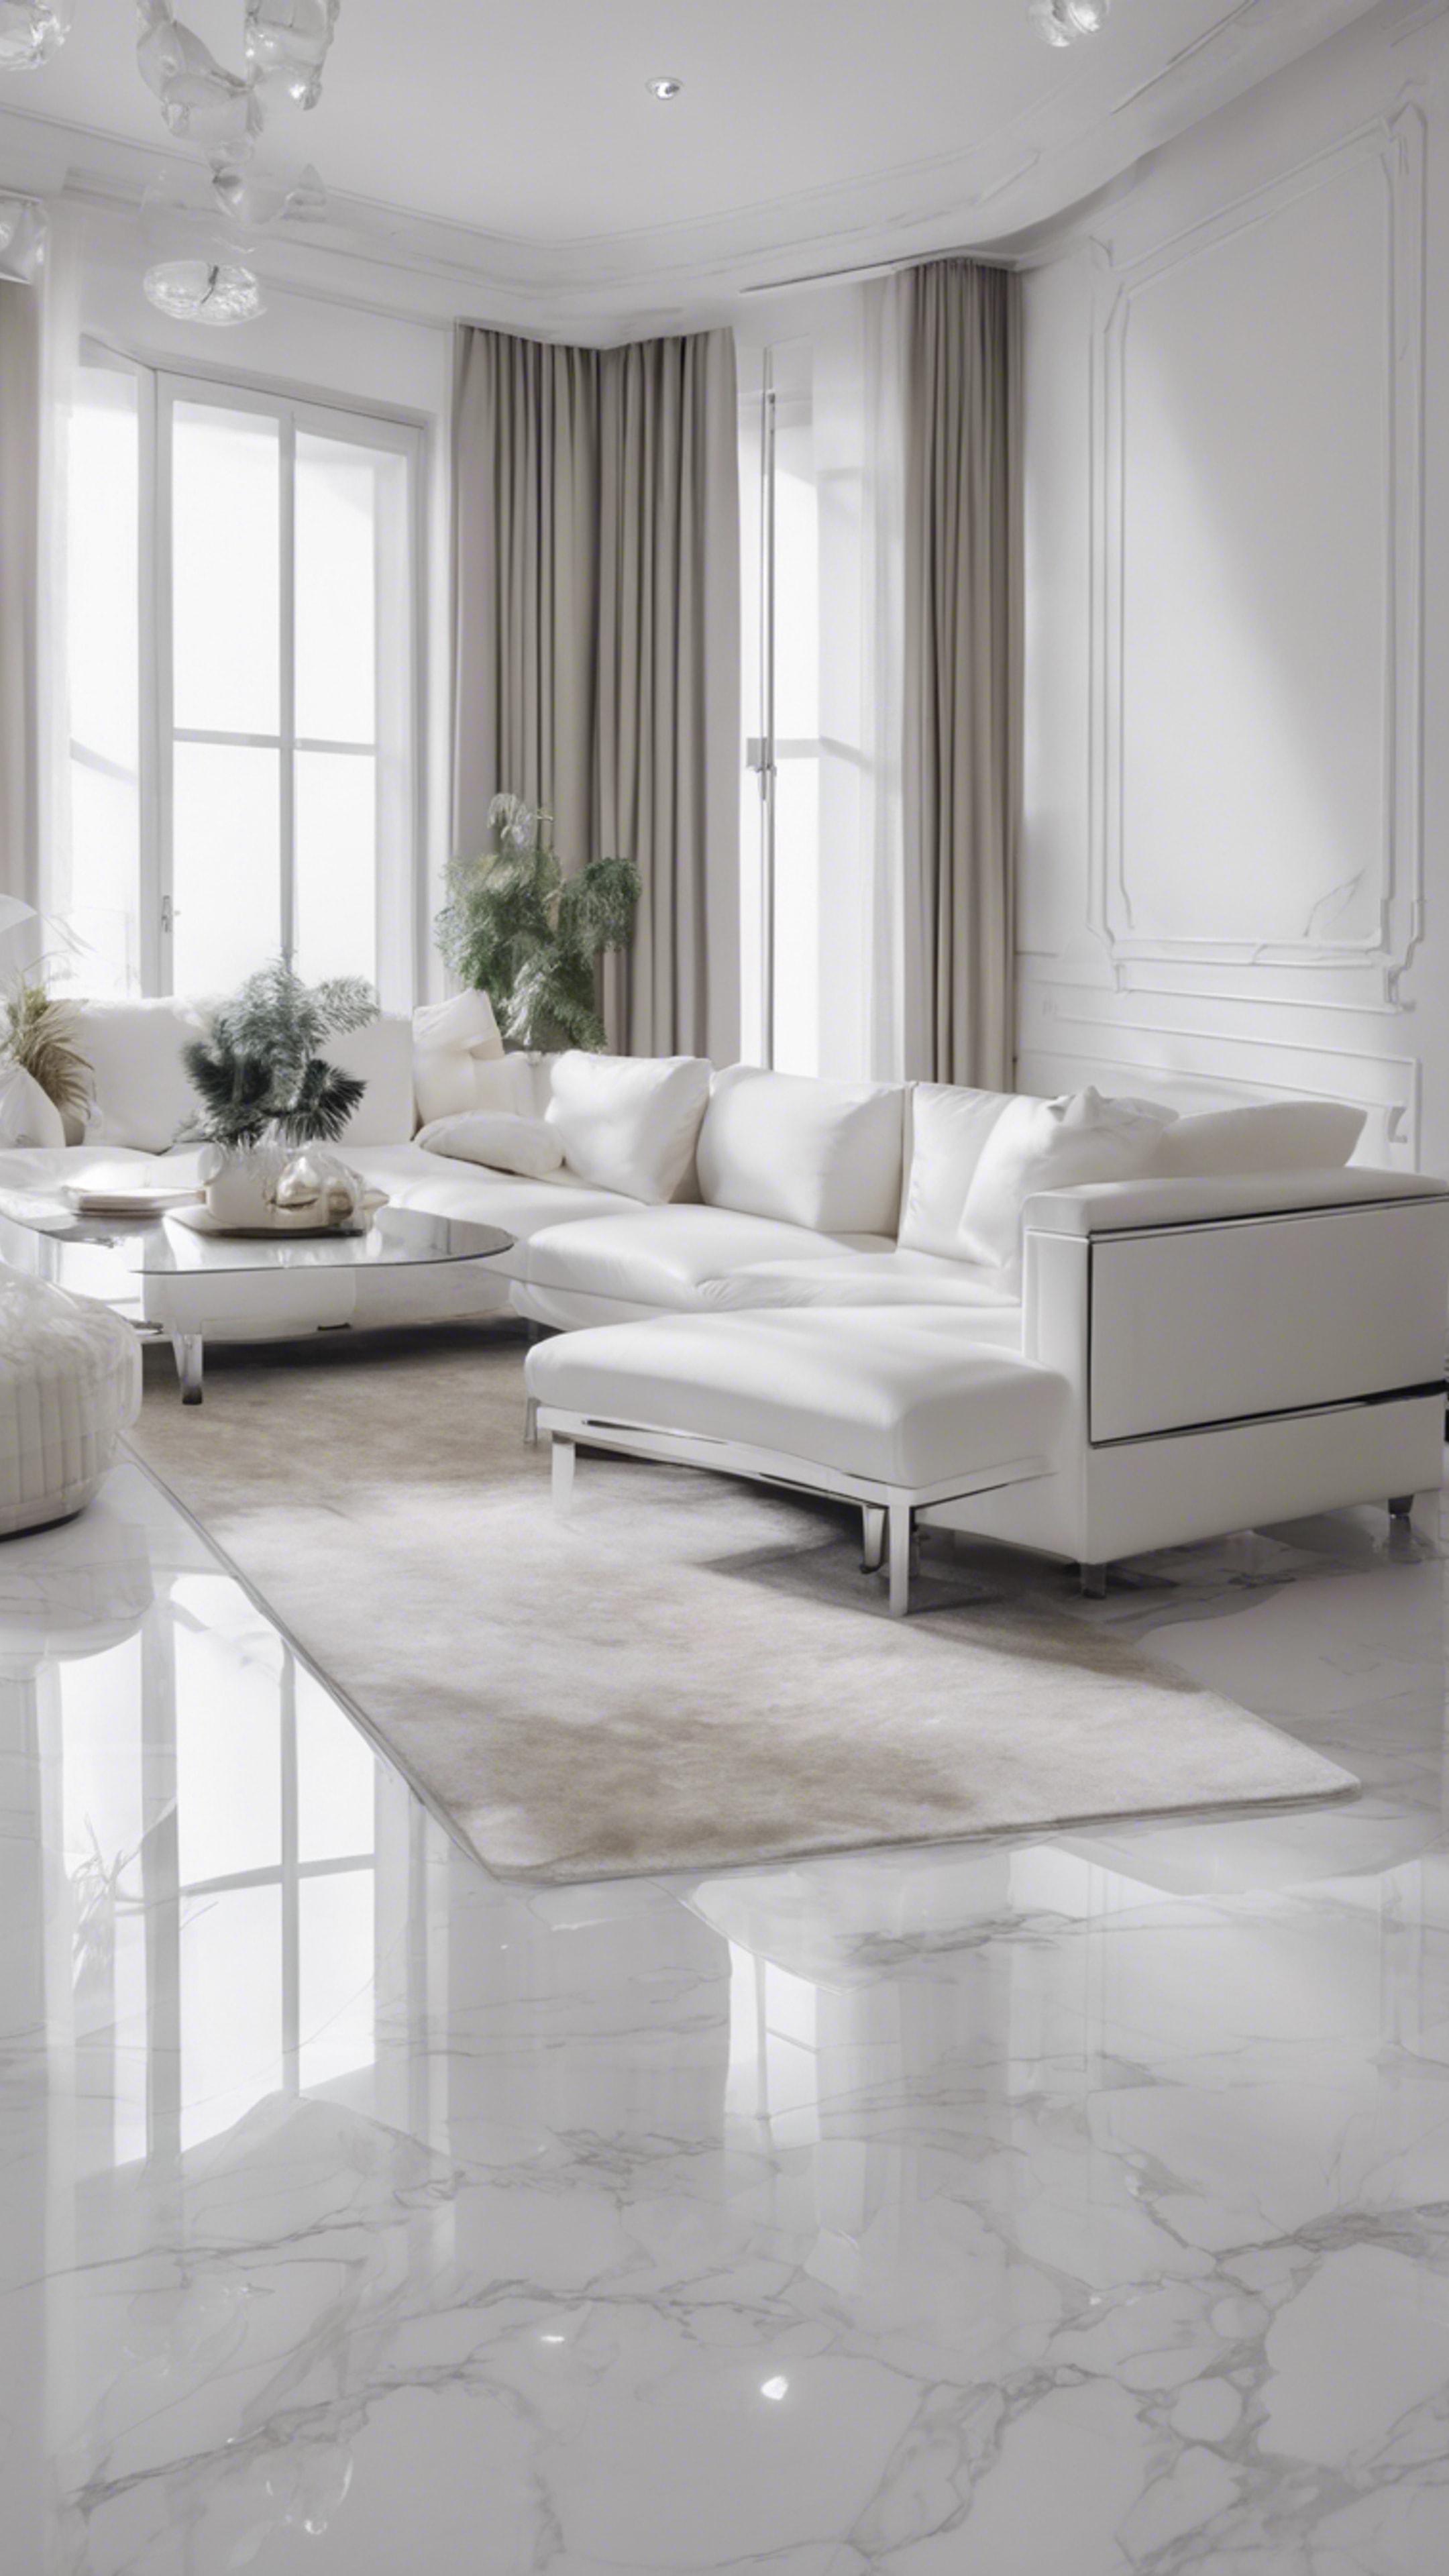 An ultra-modern minimalist interior design of a living room, with cool white walls, silver furniture and white marble floors. Tapeet[0b803decb0d241b99c2a]